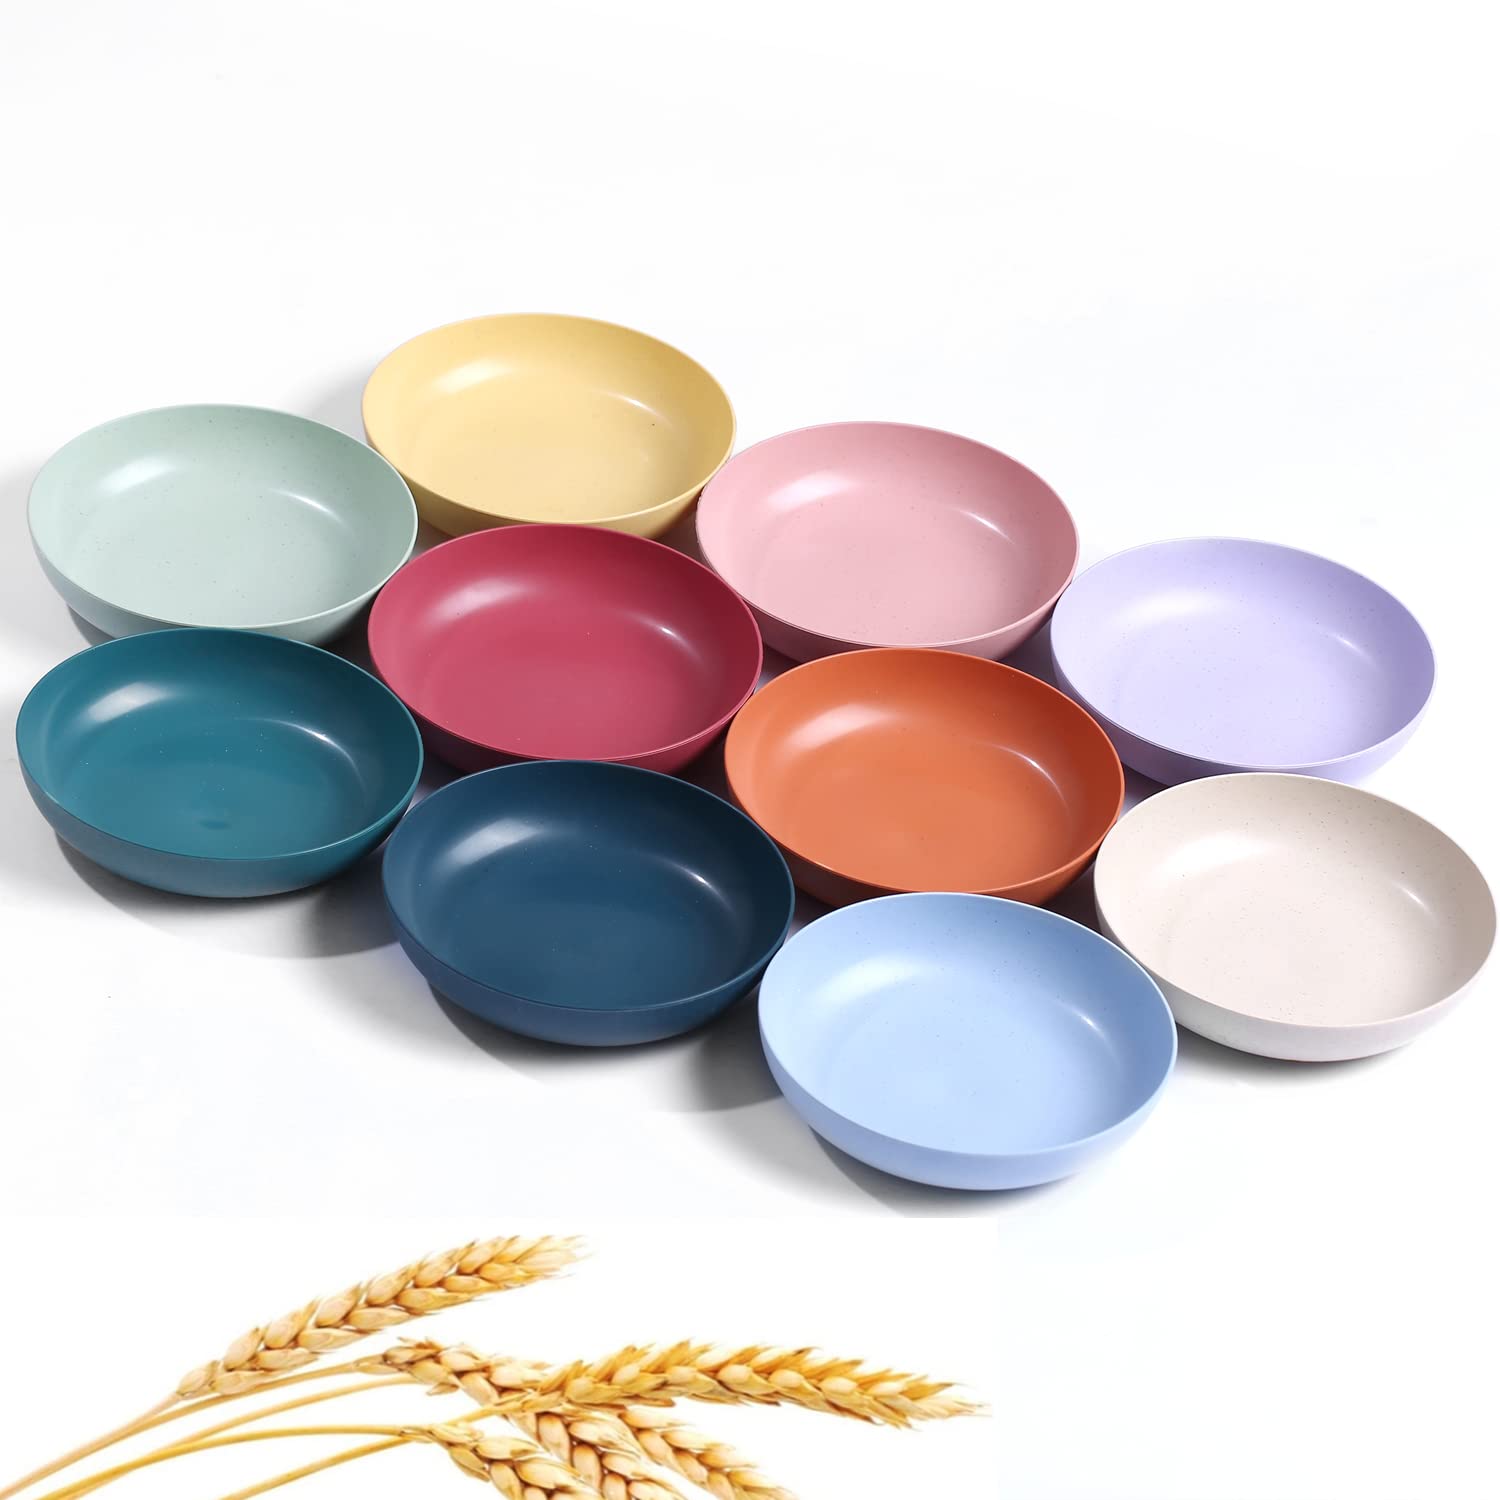 WANBY Lightweight Wheat Straw Cereal Plates Unbreakable Dinner Dishes Plates Set Dishwasher & Microwave Safe (Plates 10 Pack 5.6')